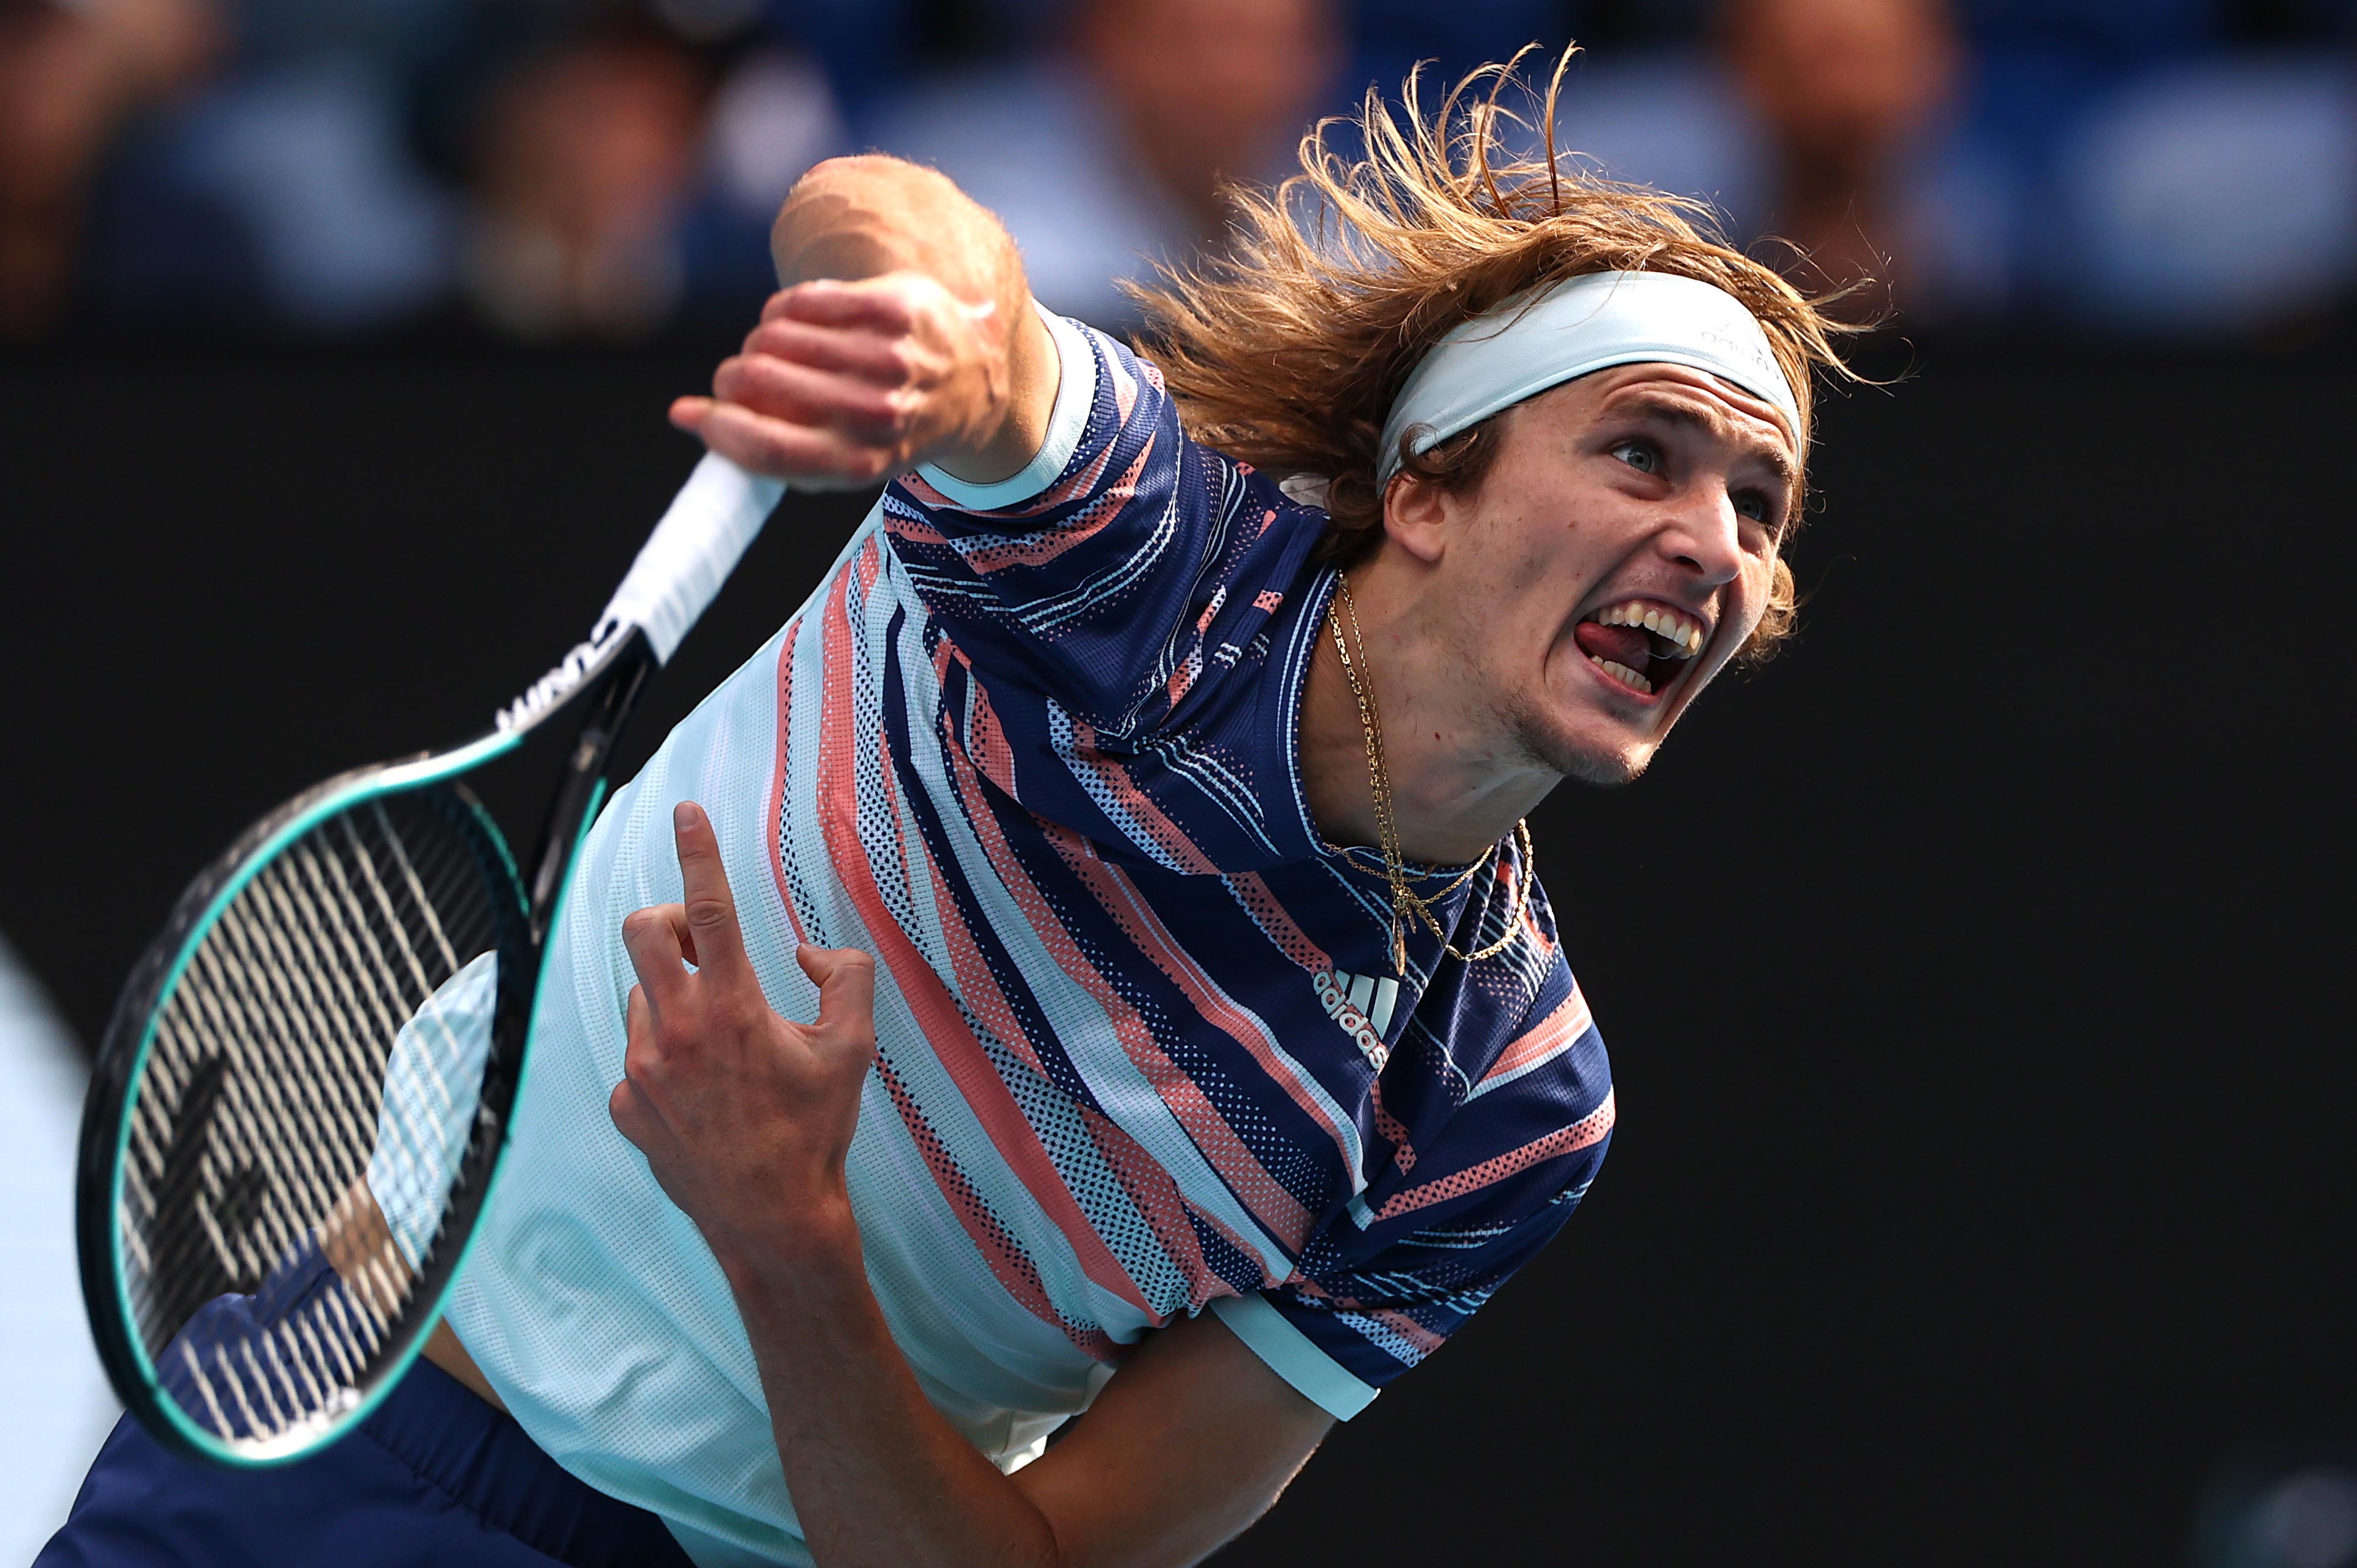 Germany's Alexander Zverev in action during the match against Belarus' Egor Gerasimov during the Australian Open Second Round match, at Melbourne Park, in Melbourne, Australia, on January 23, 2020. Photo: Reuters